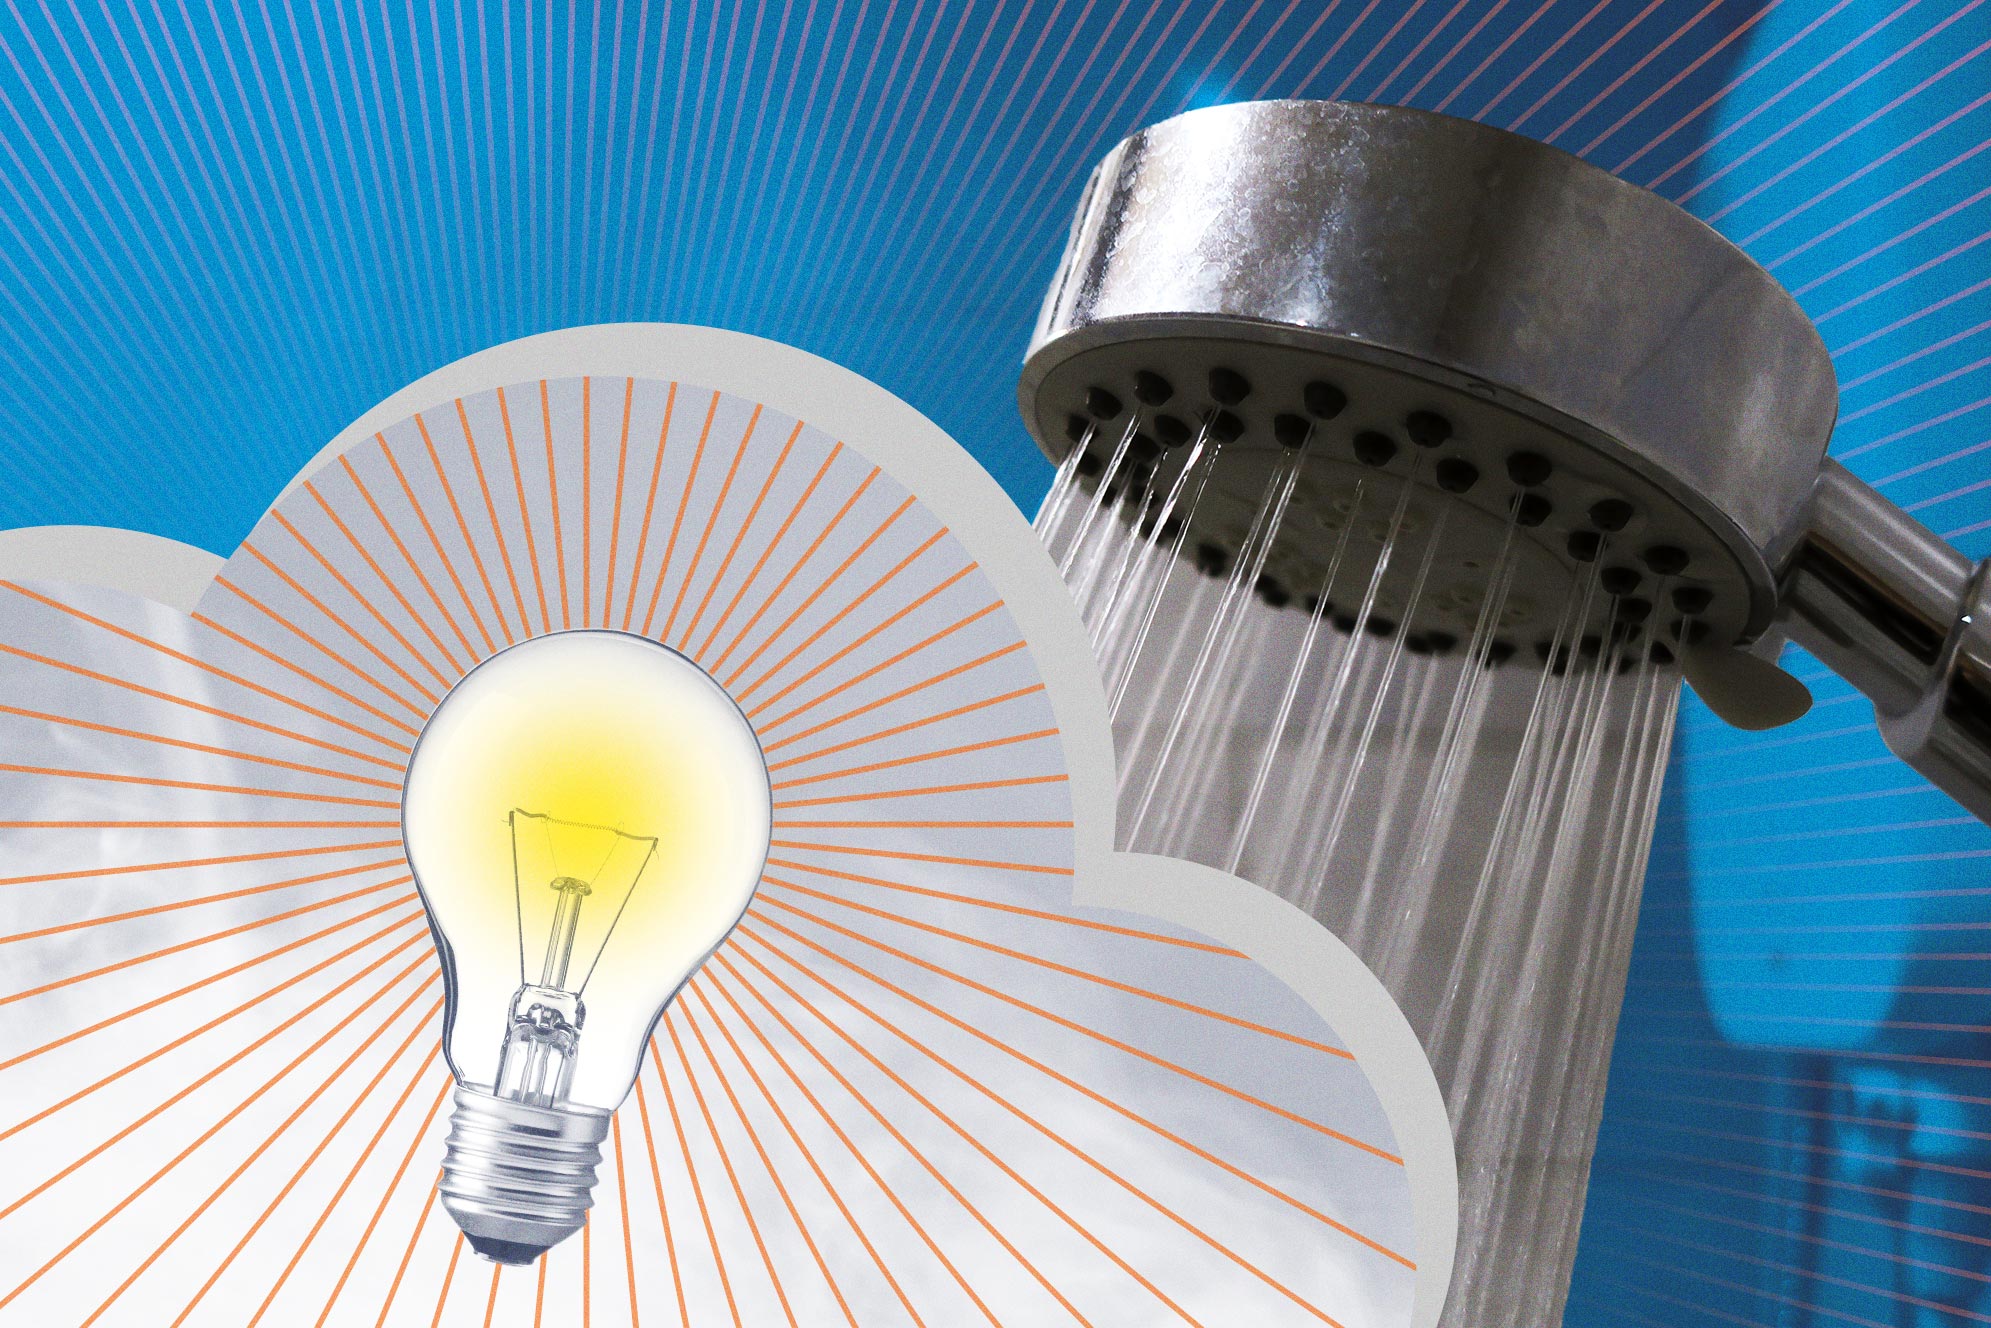 Illustration of a running shower and a lightbulb with steam clouds